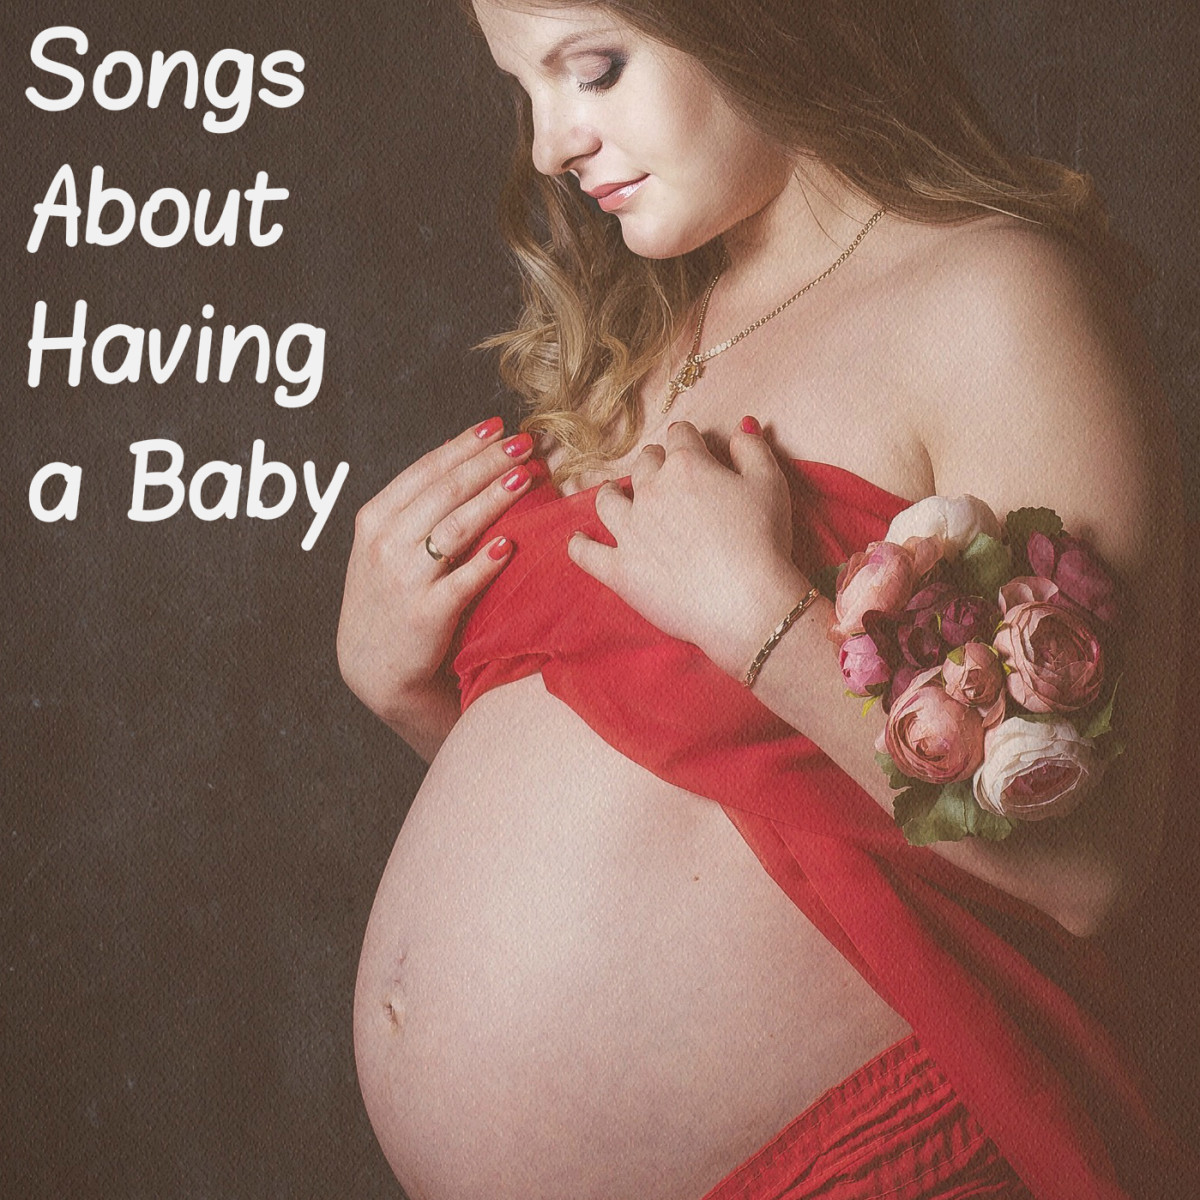 46 Songs About Having a Baby